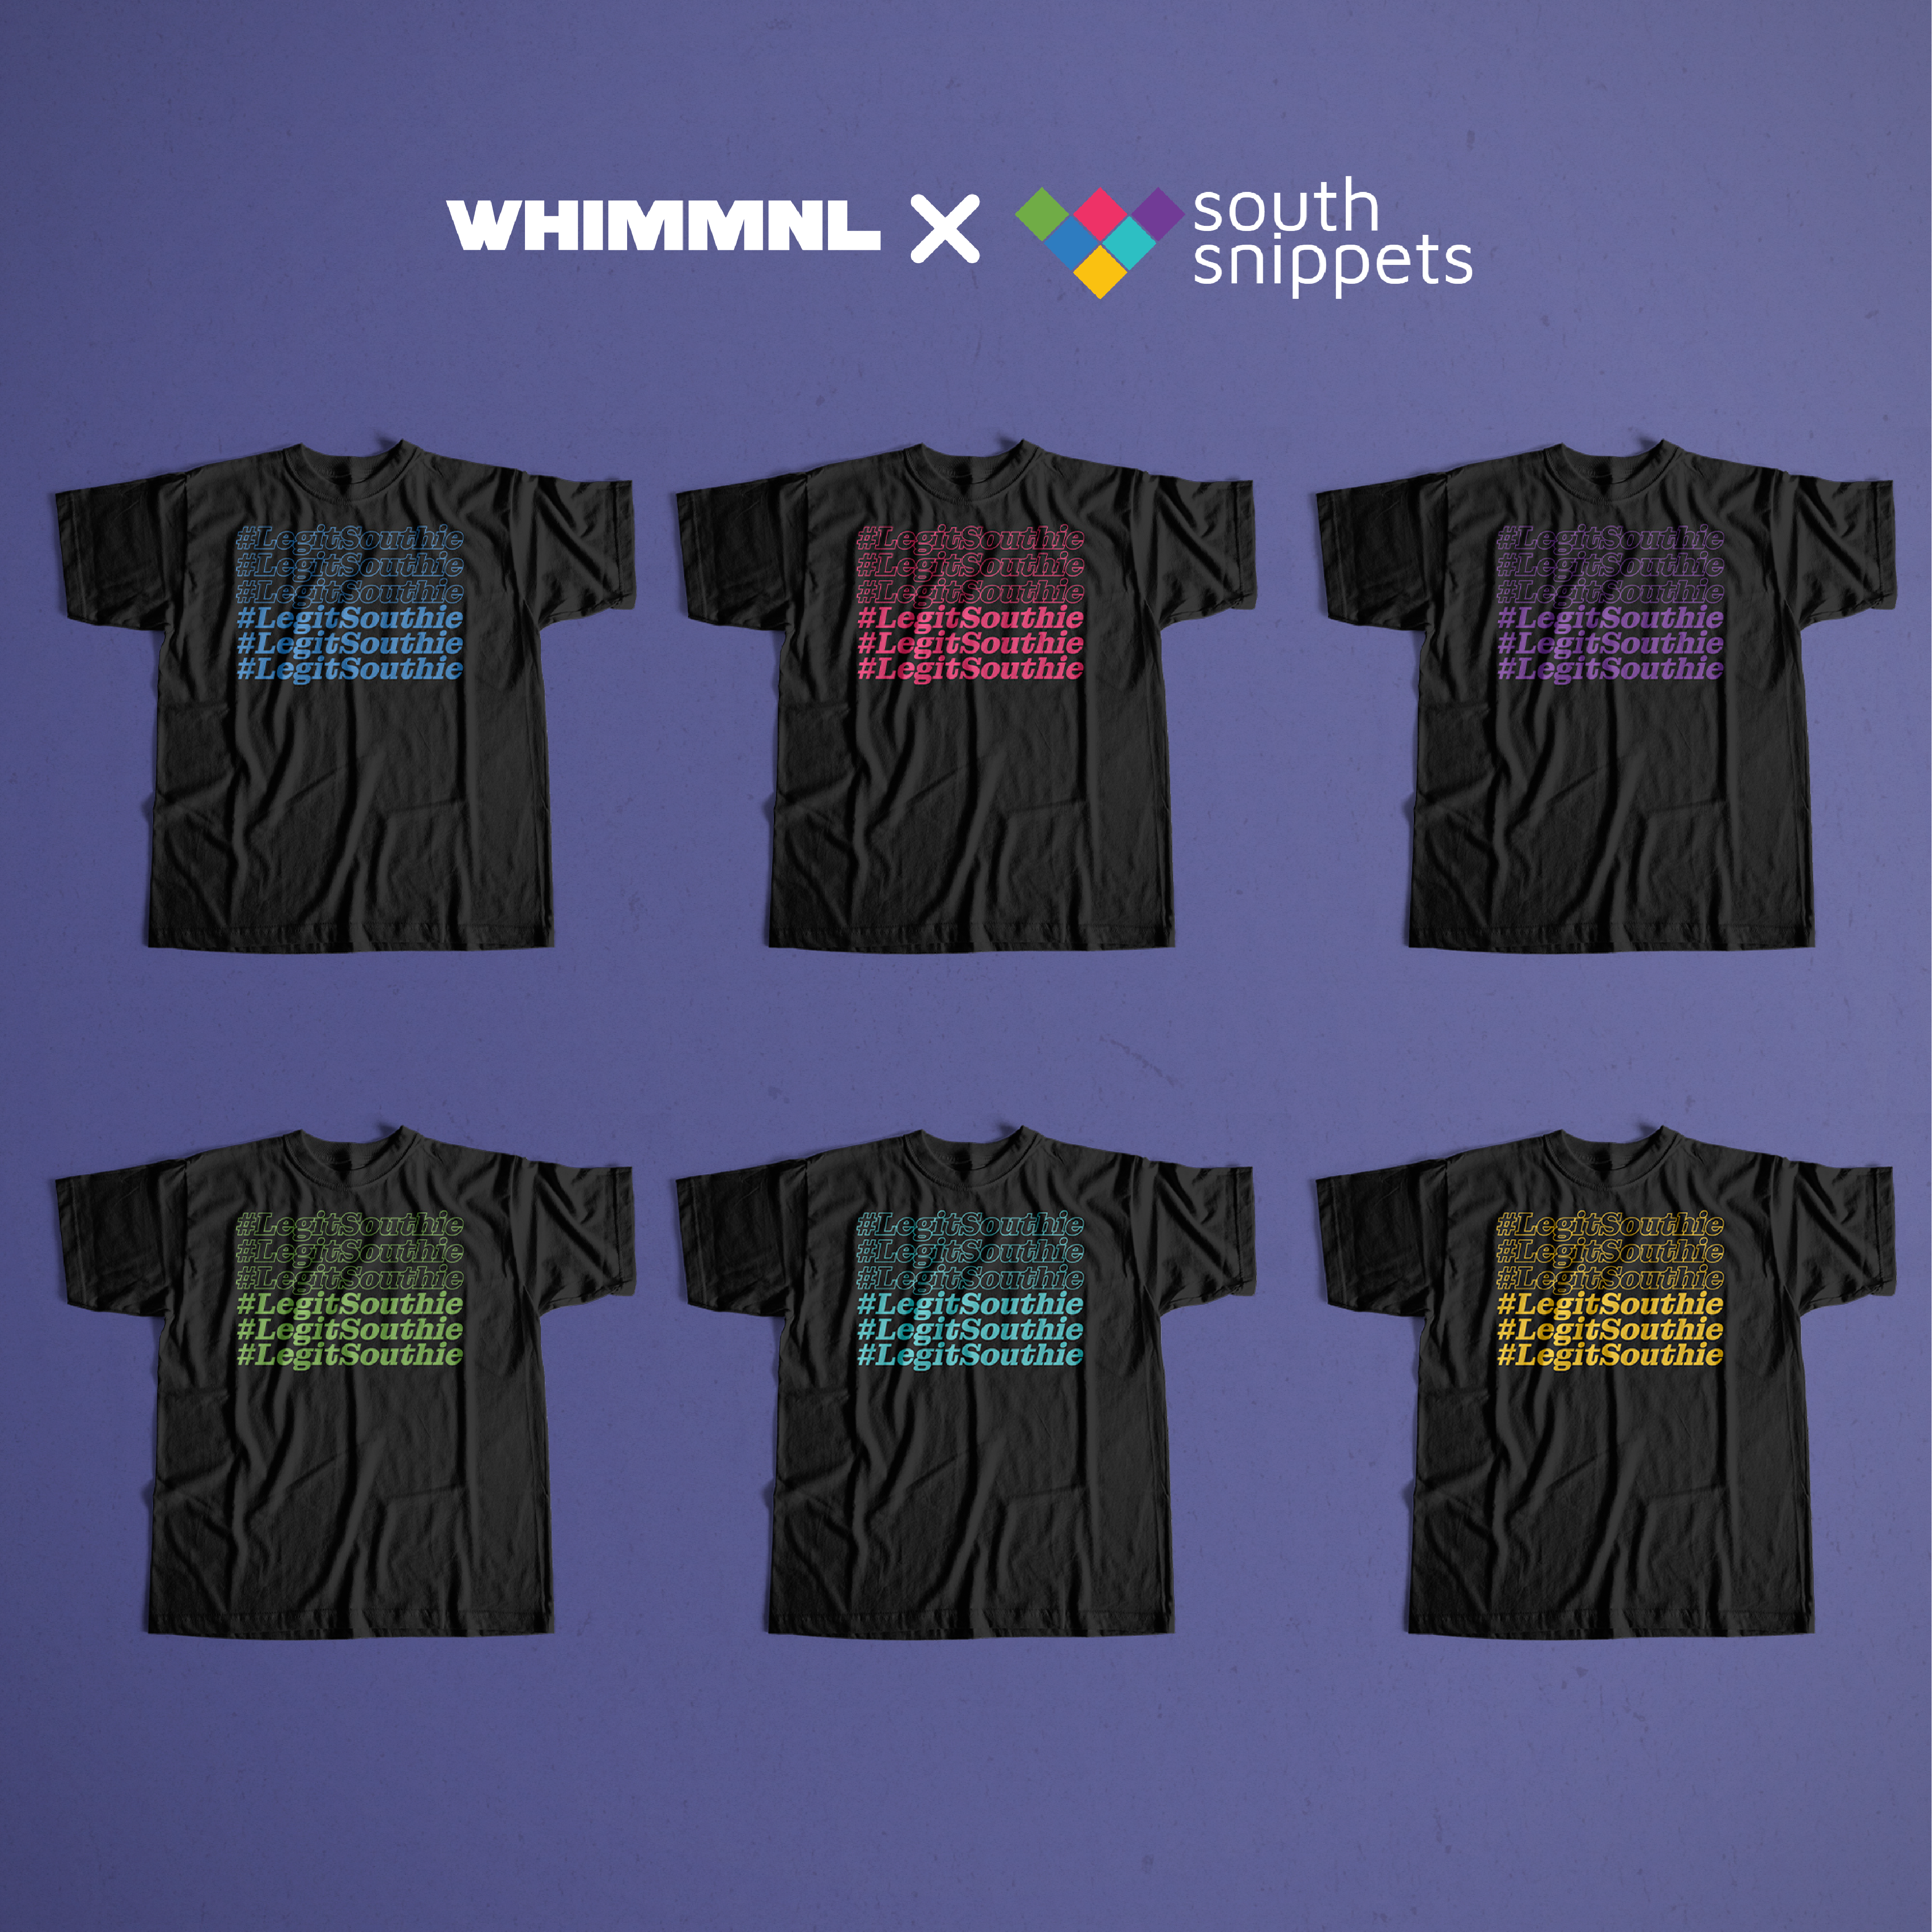 [Whim x South Snippets] #LegitSouthie Pa-Ulit ‘Cool’it Shirt in Black